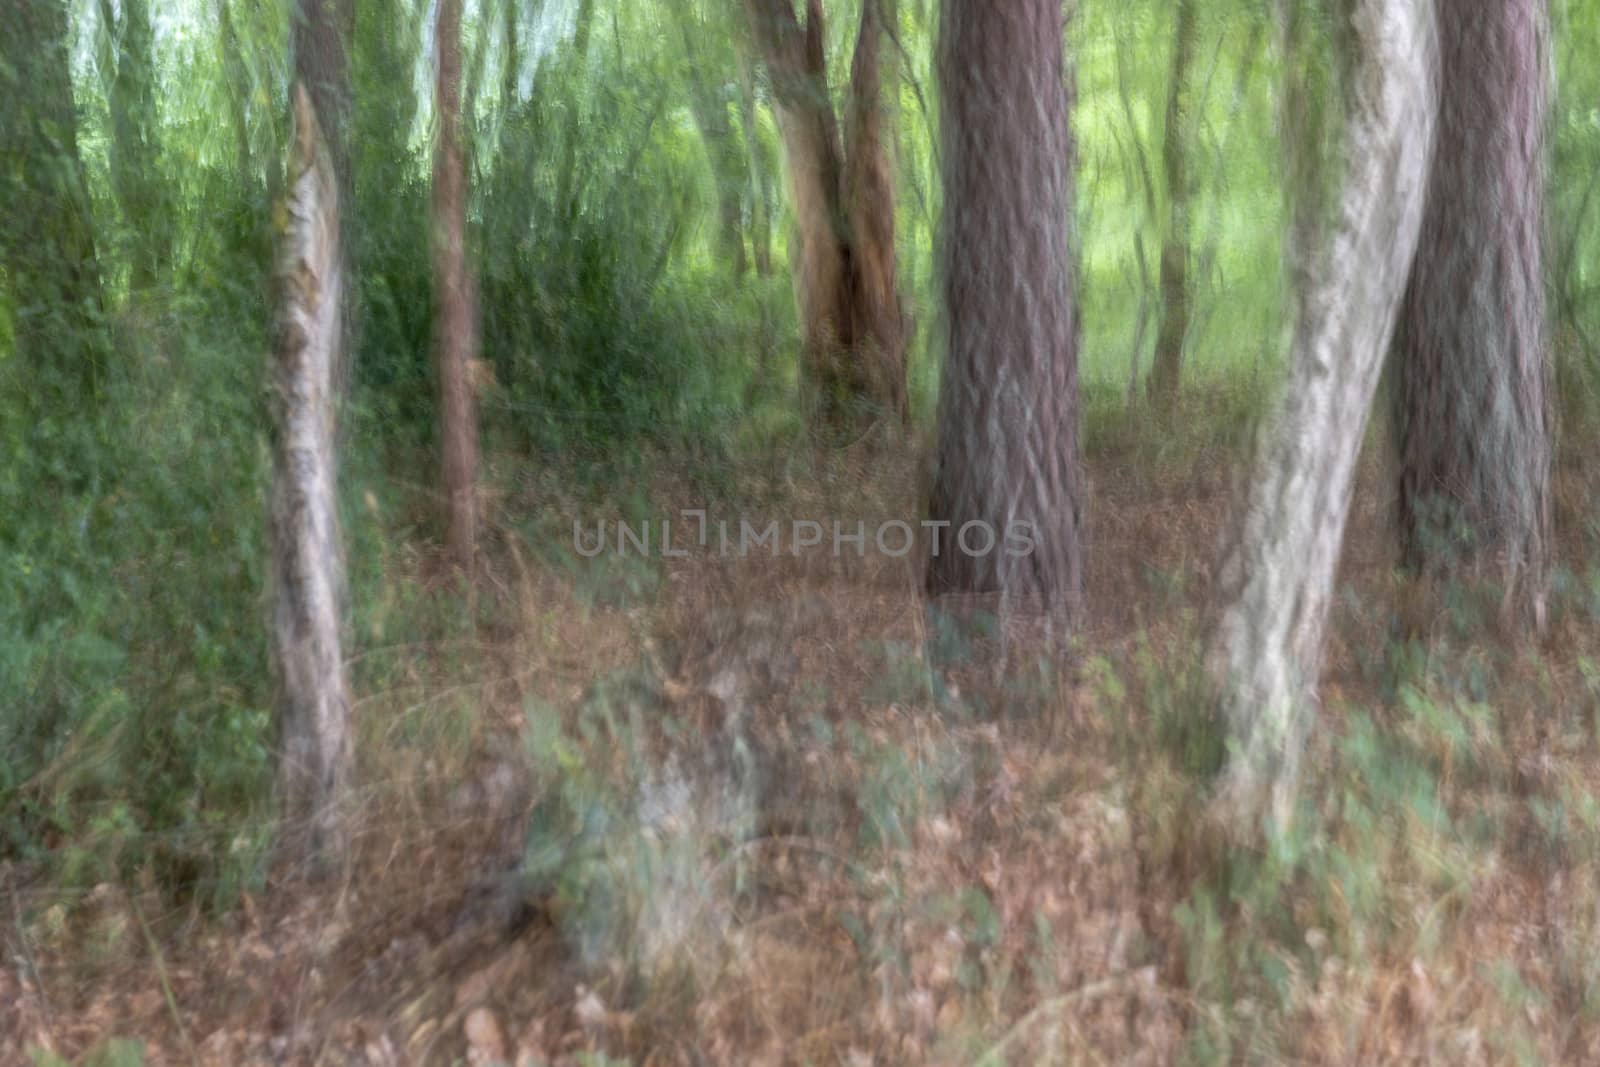 Abstract trees in a forest
 by Tofotografie